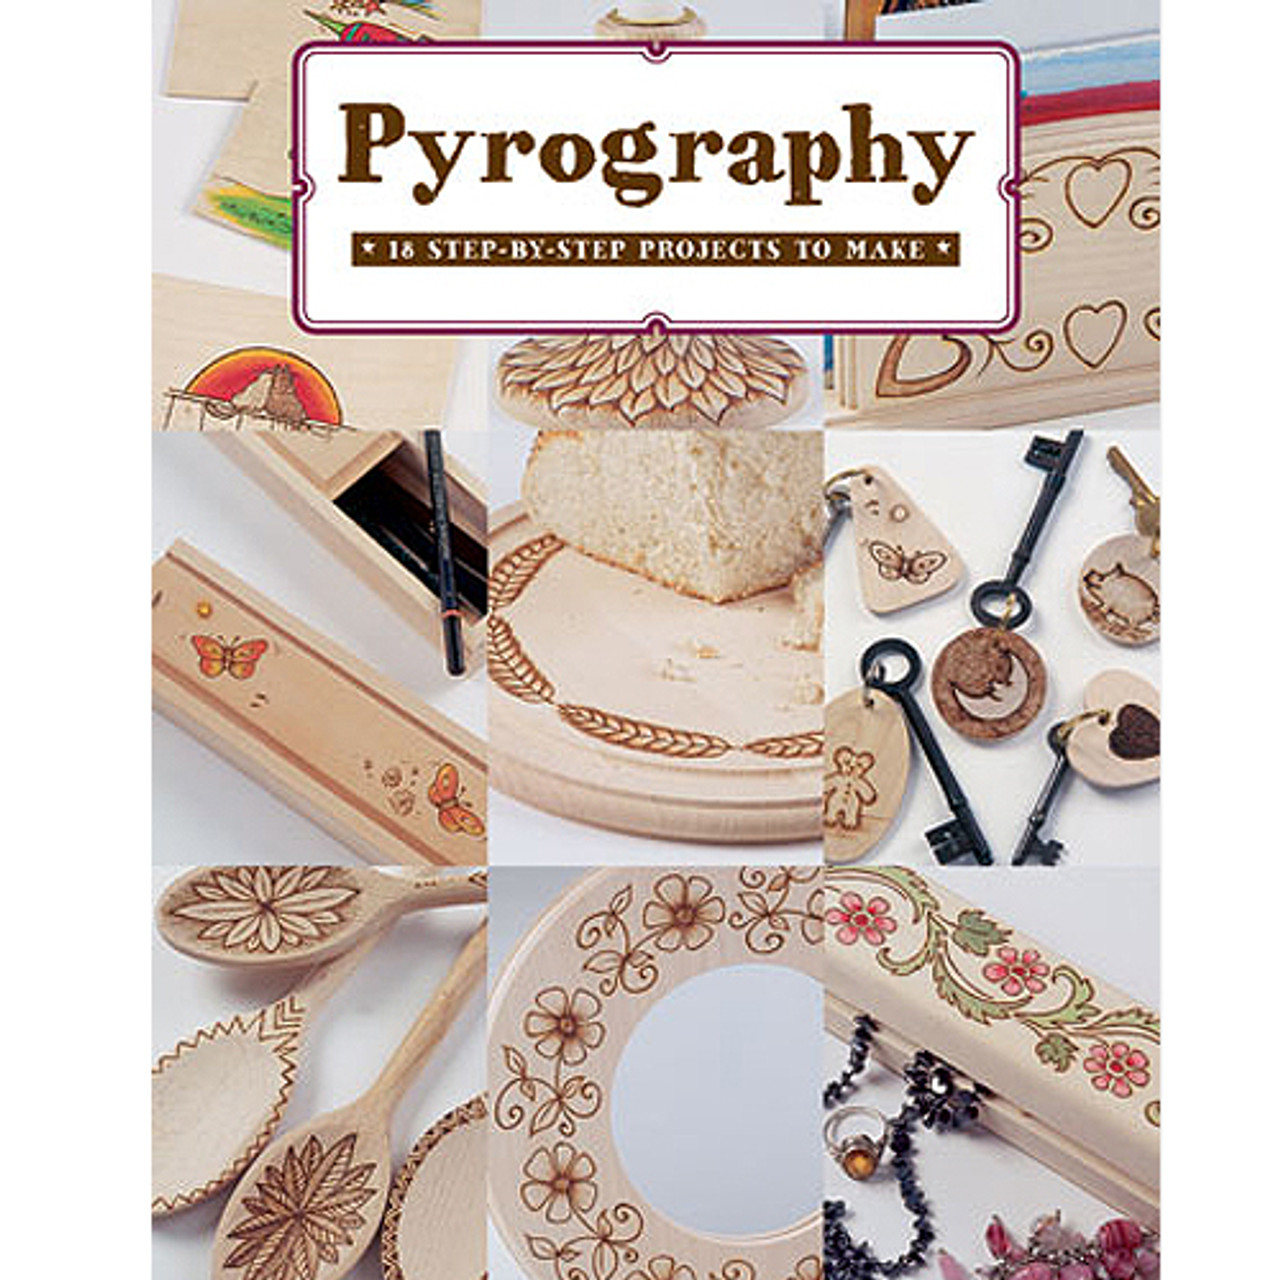 Pyrography 18 Step-By-Step Projects